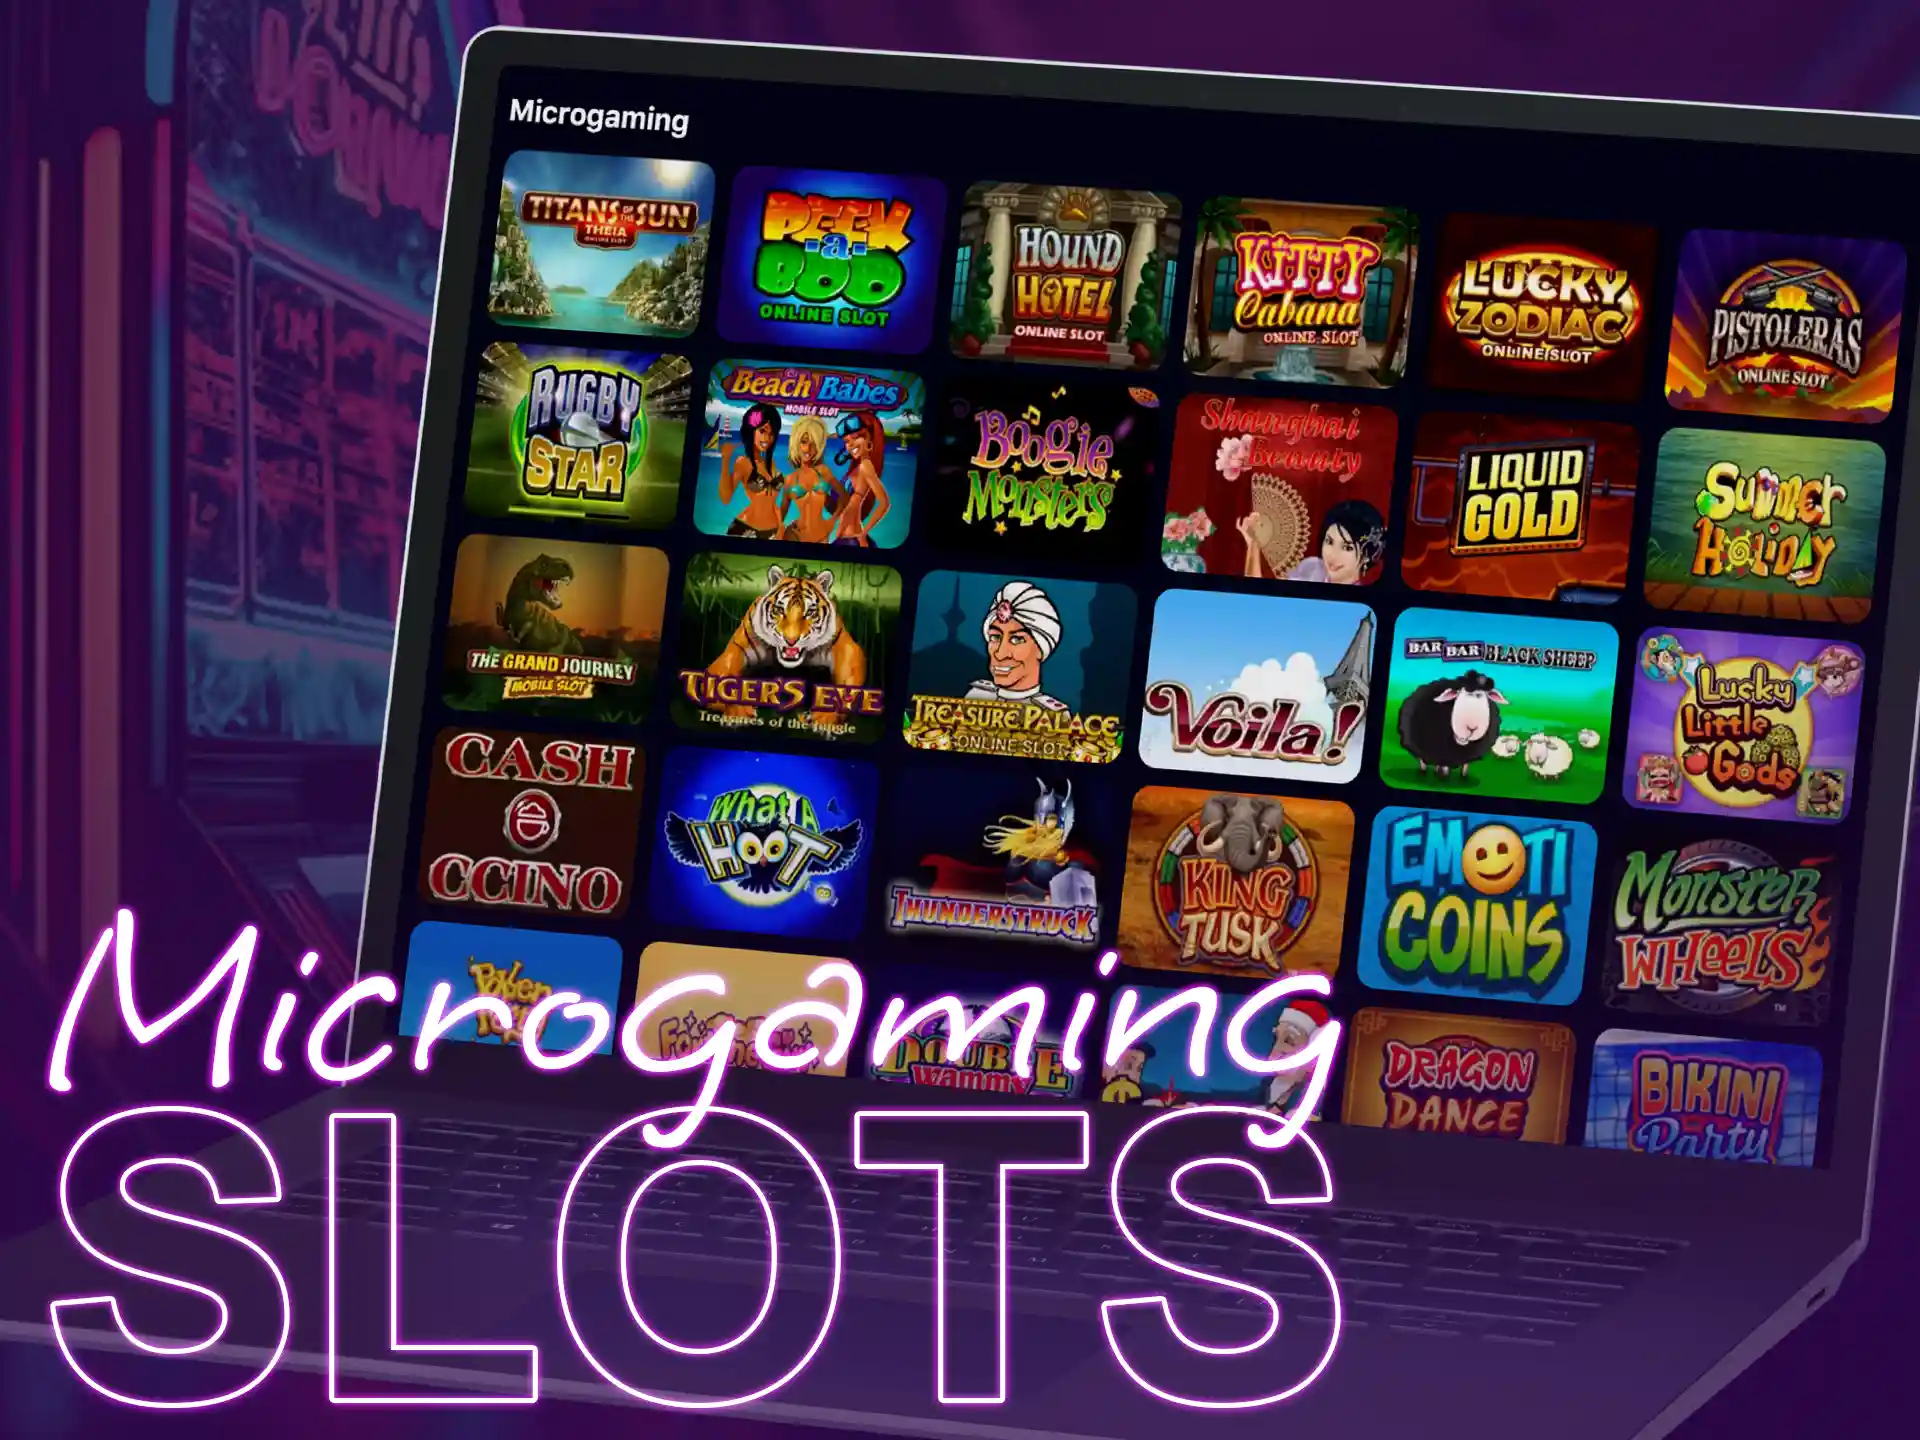 Provider Microgaming has released more than 500 slots of absolutely different types and themes.